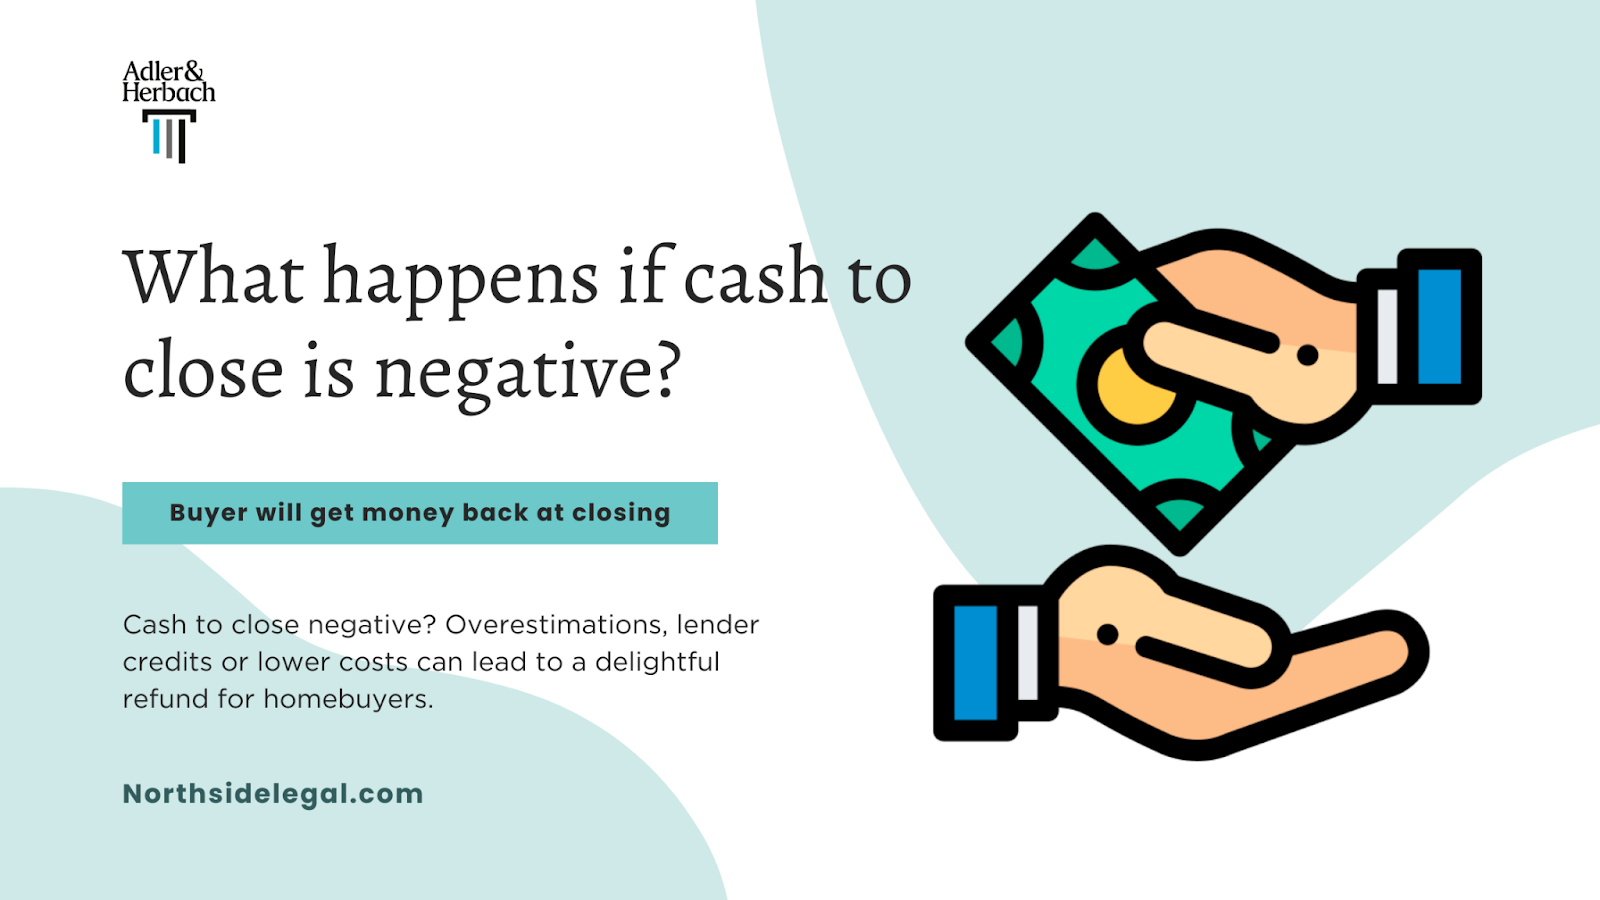 What happens if cash to close is negative for a House?